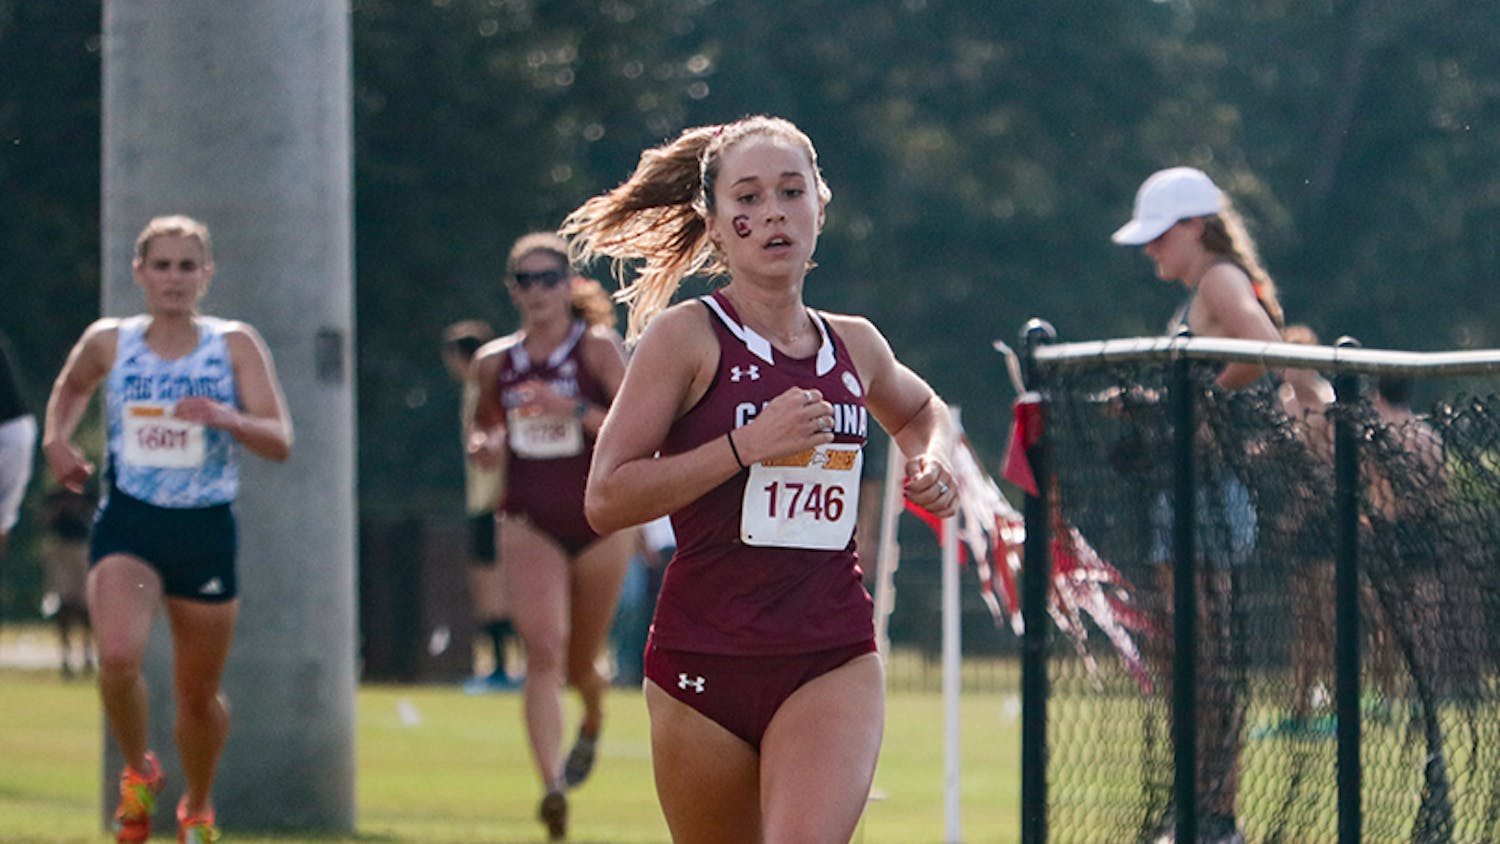 Senior Hannah Twine in front of a pack of runners at the Winthrop Invitational on Sept. 18, 2021.